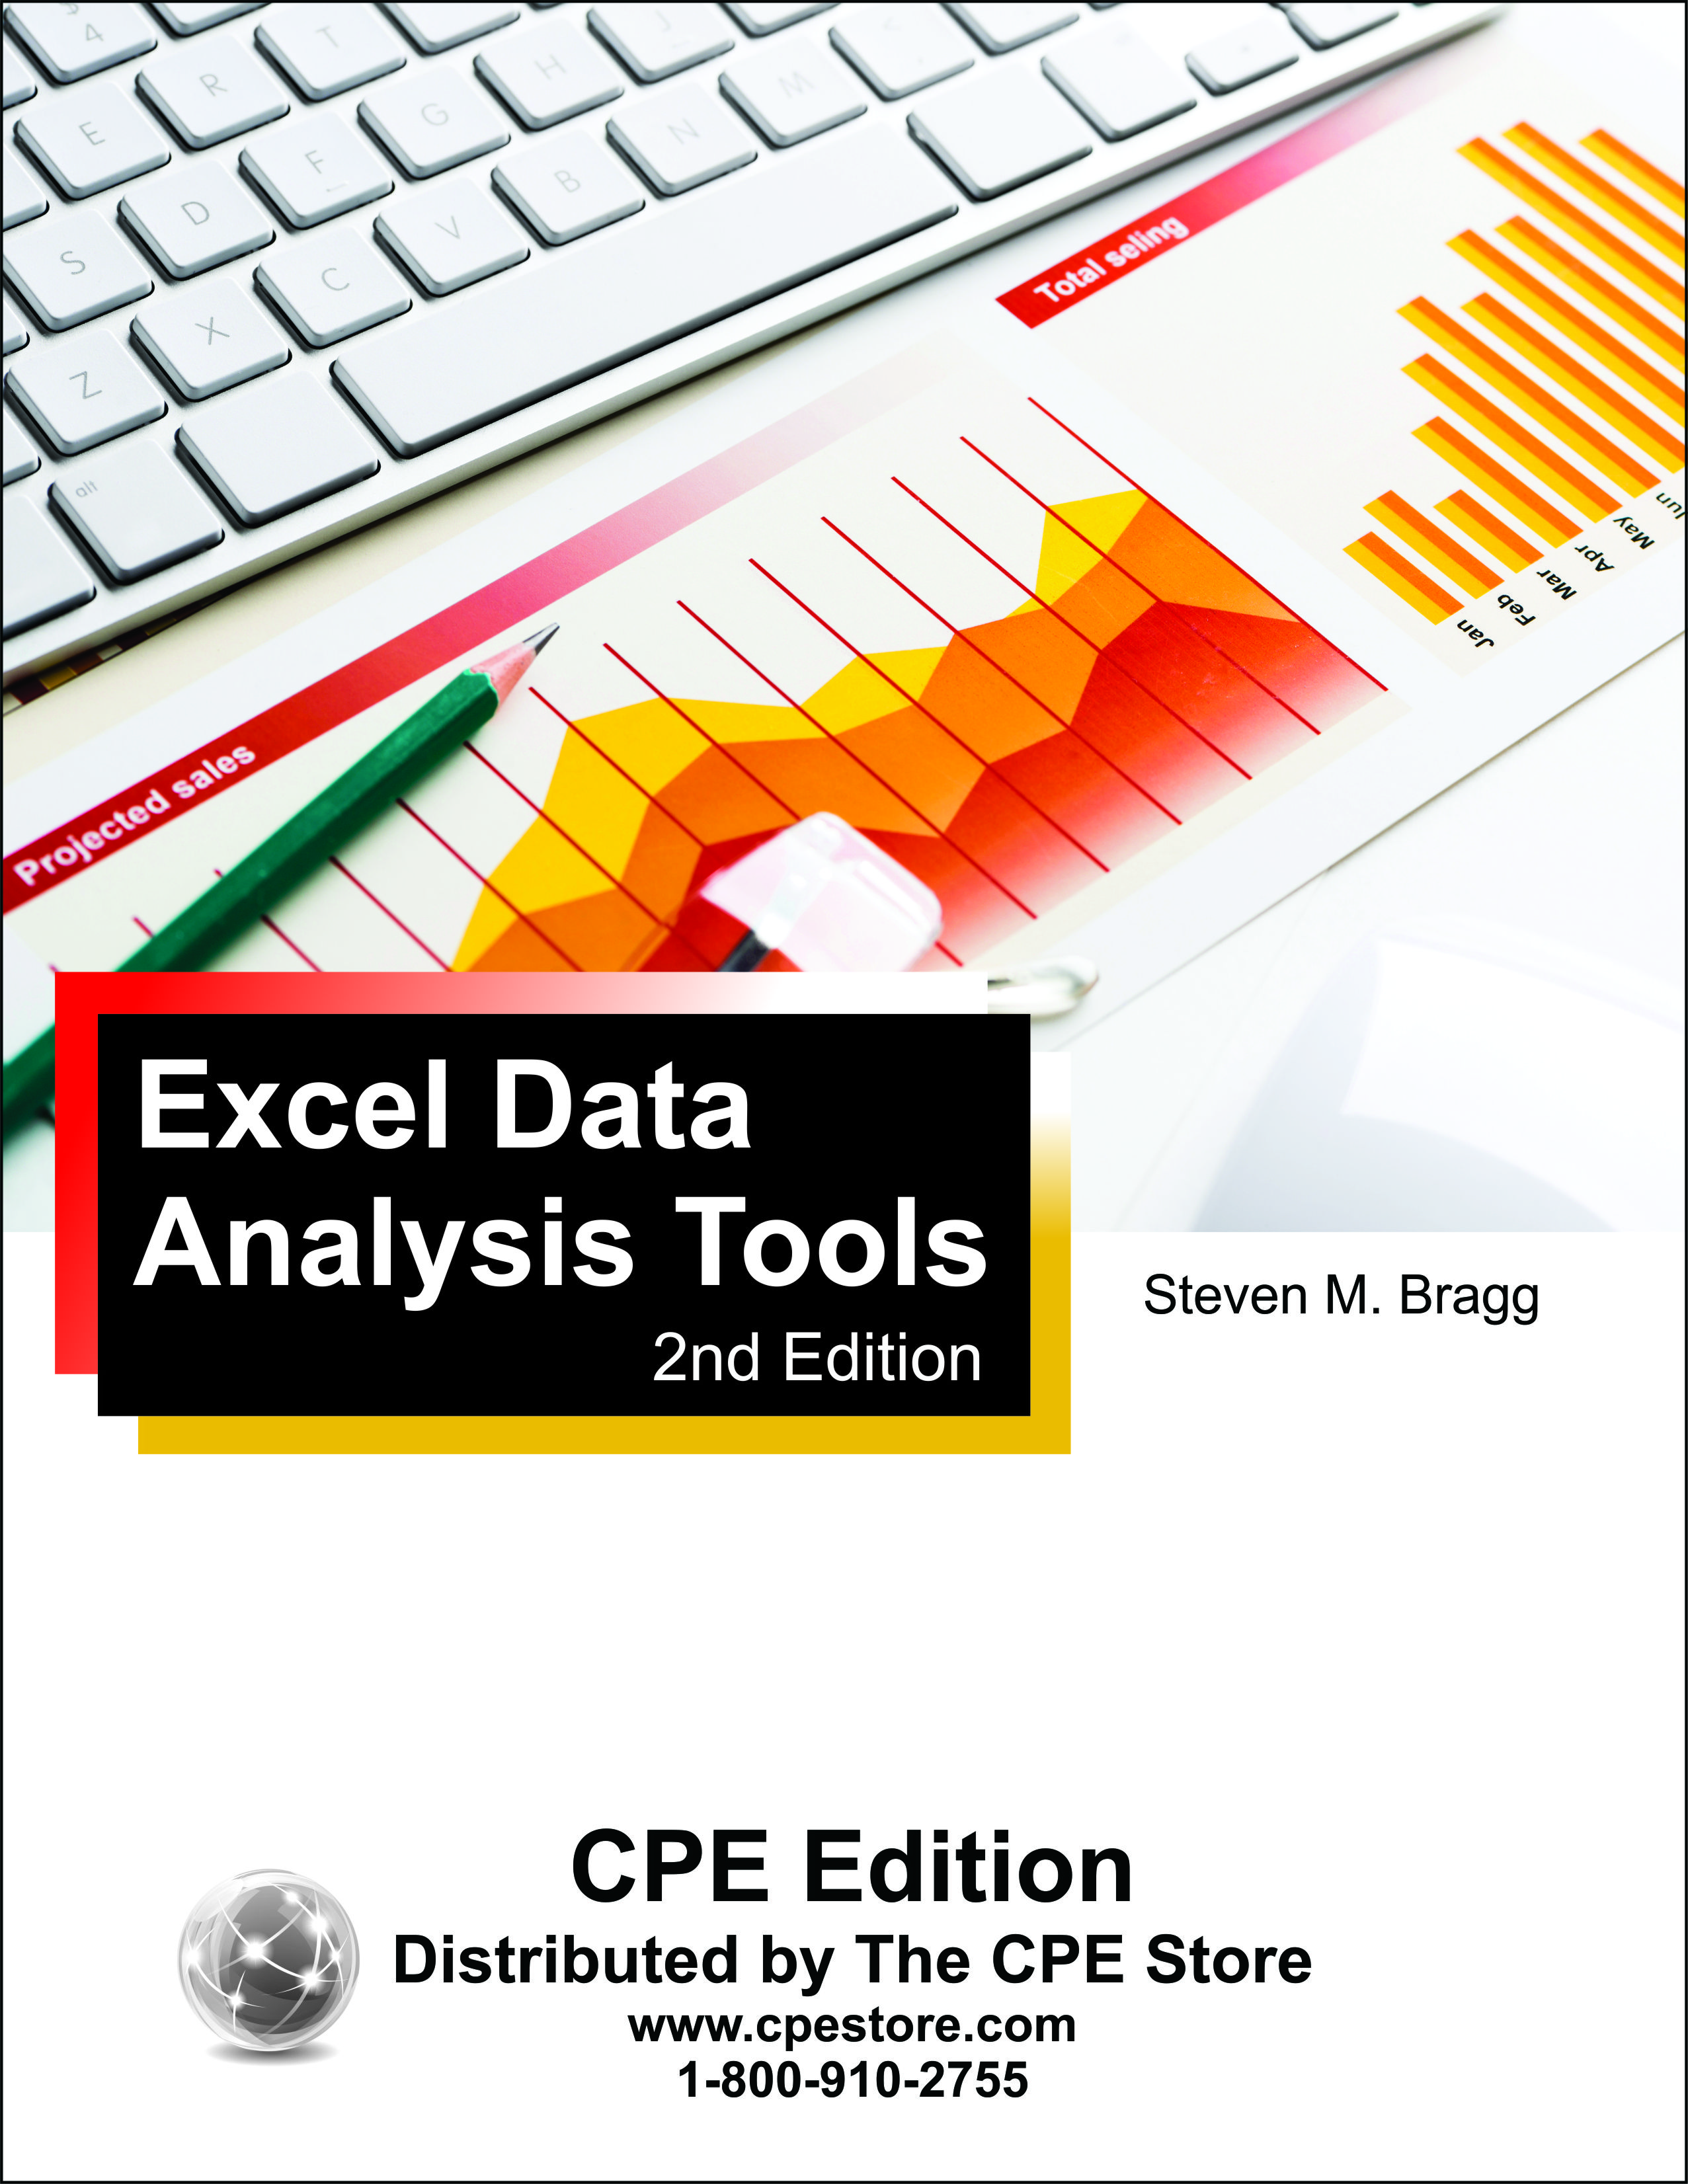 Excel Data Analysis Tools